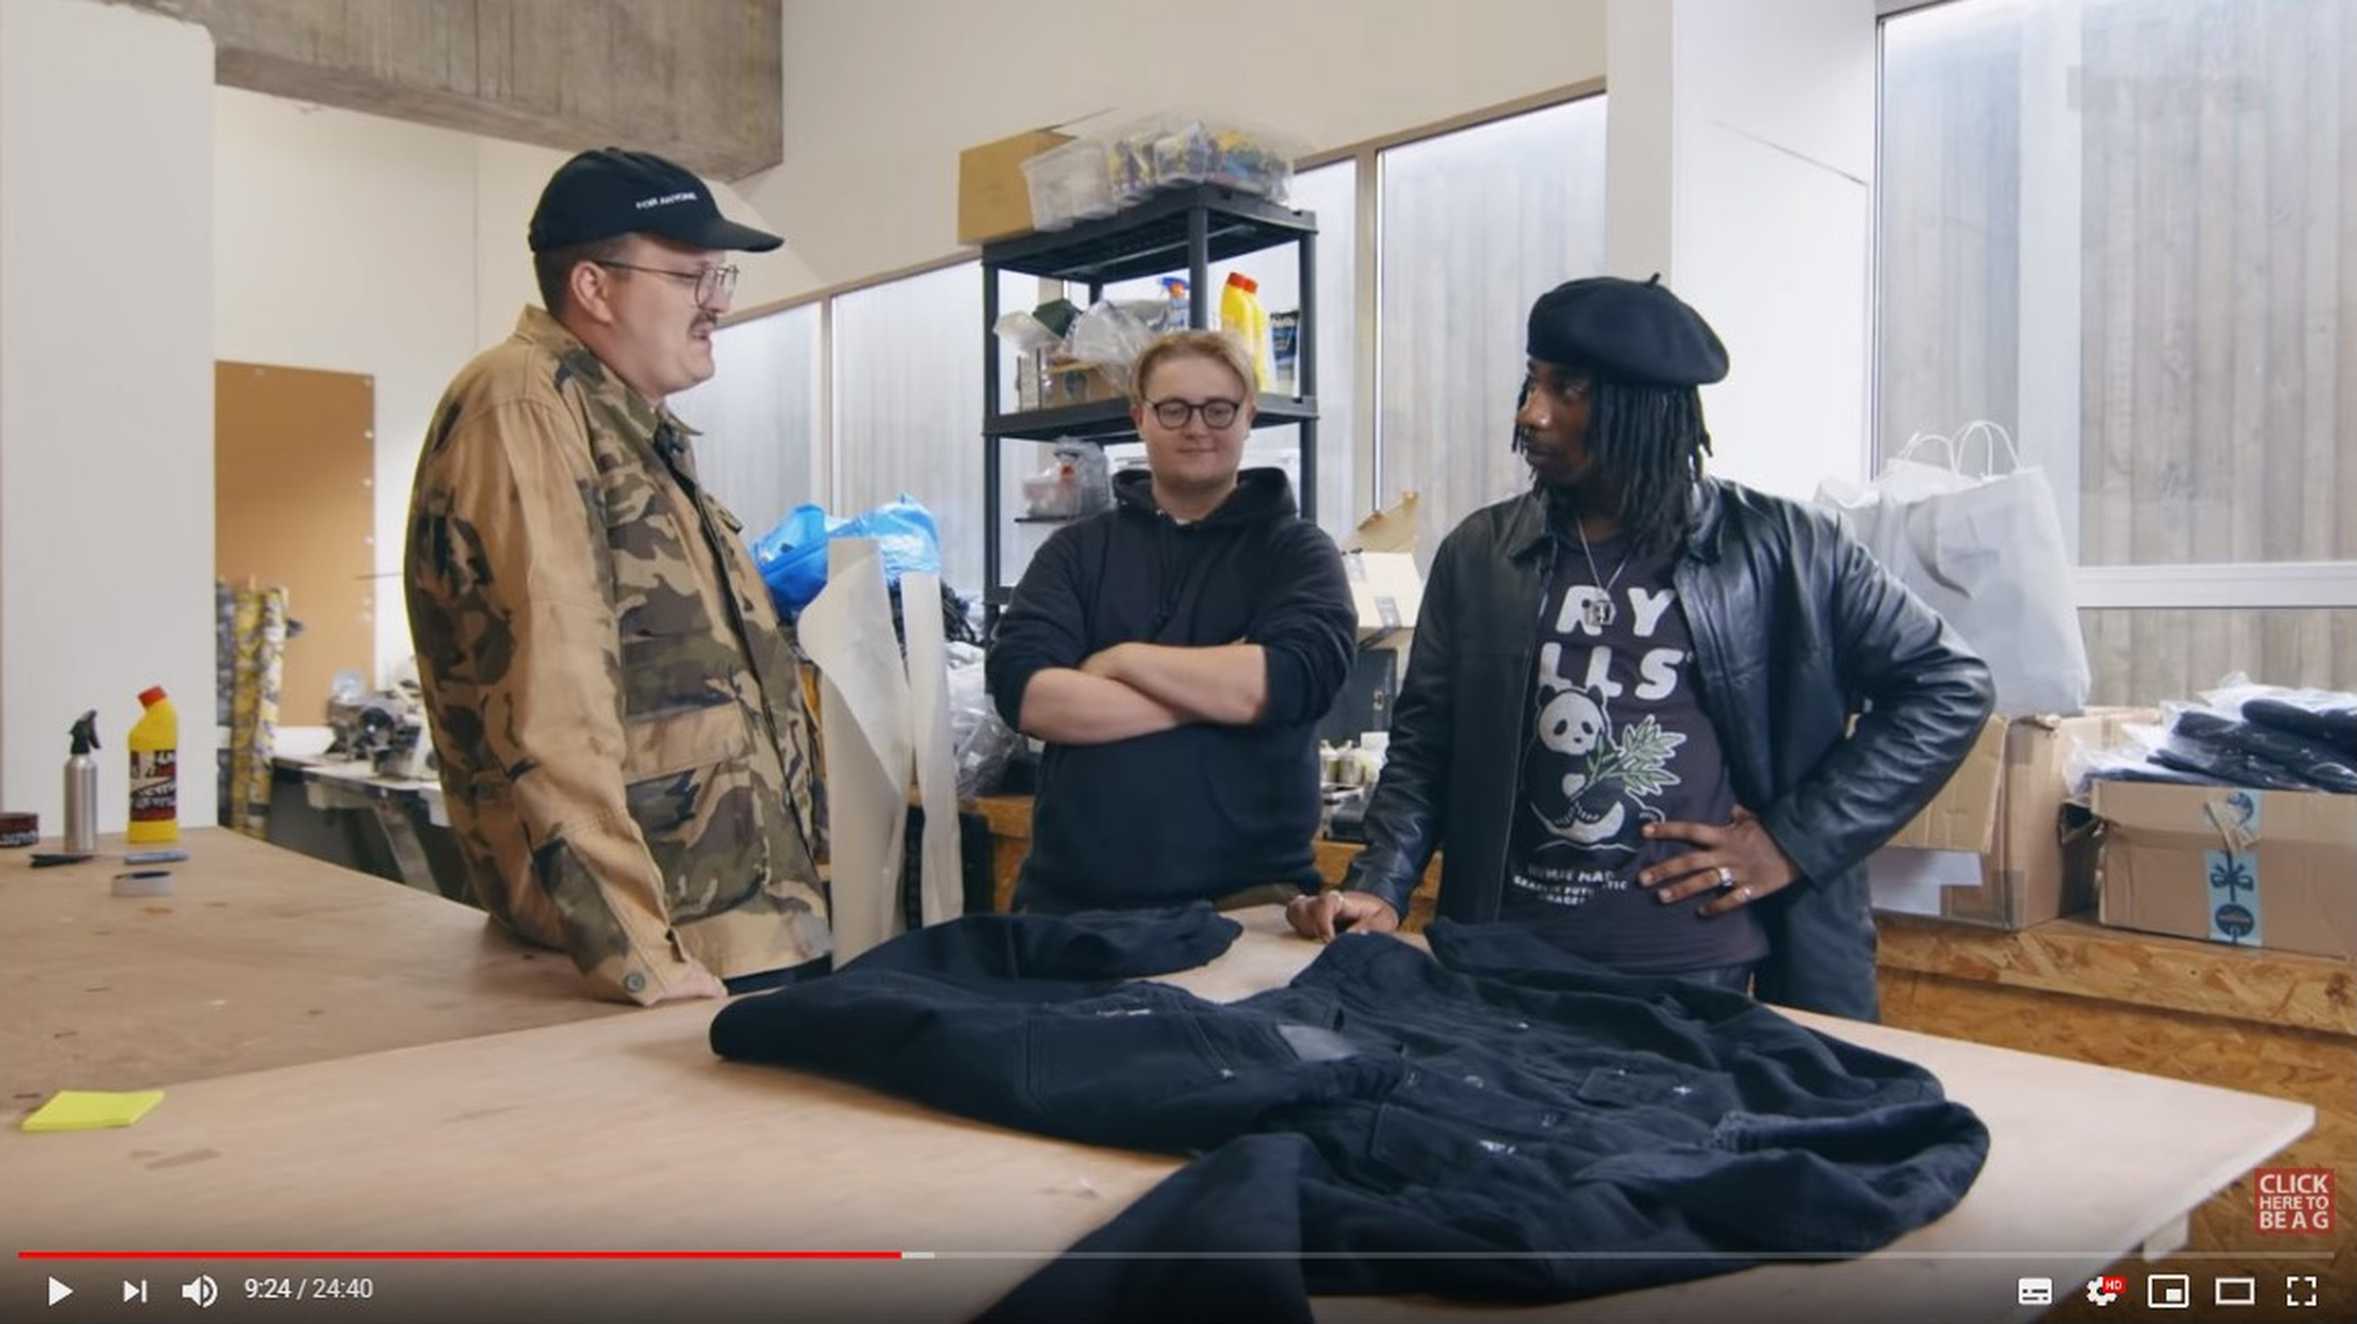 Xavier and one of the PAQ crew talking to a designer in his studio